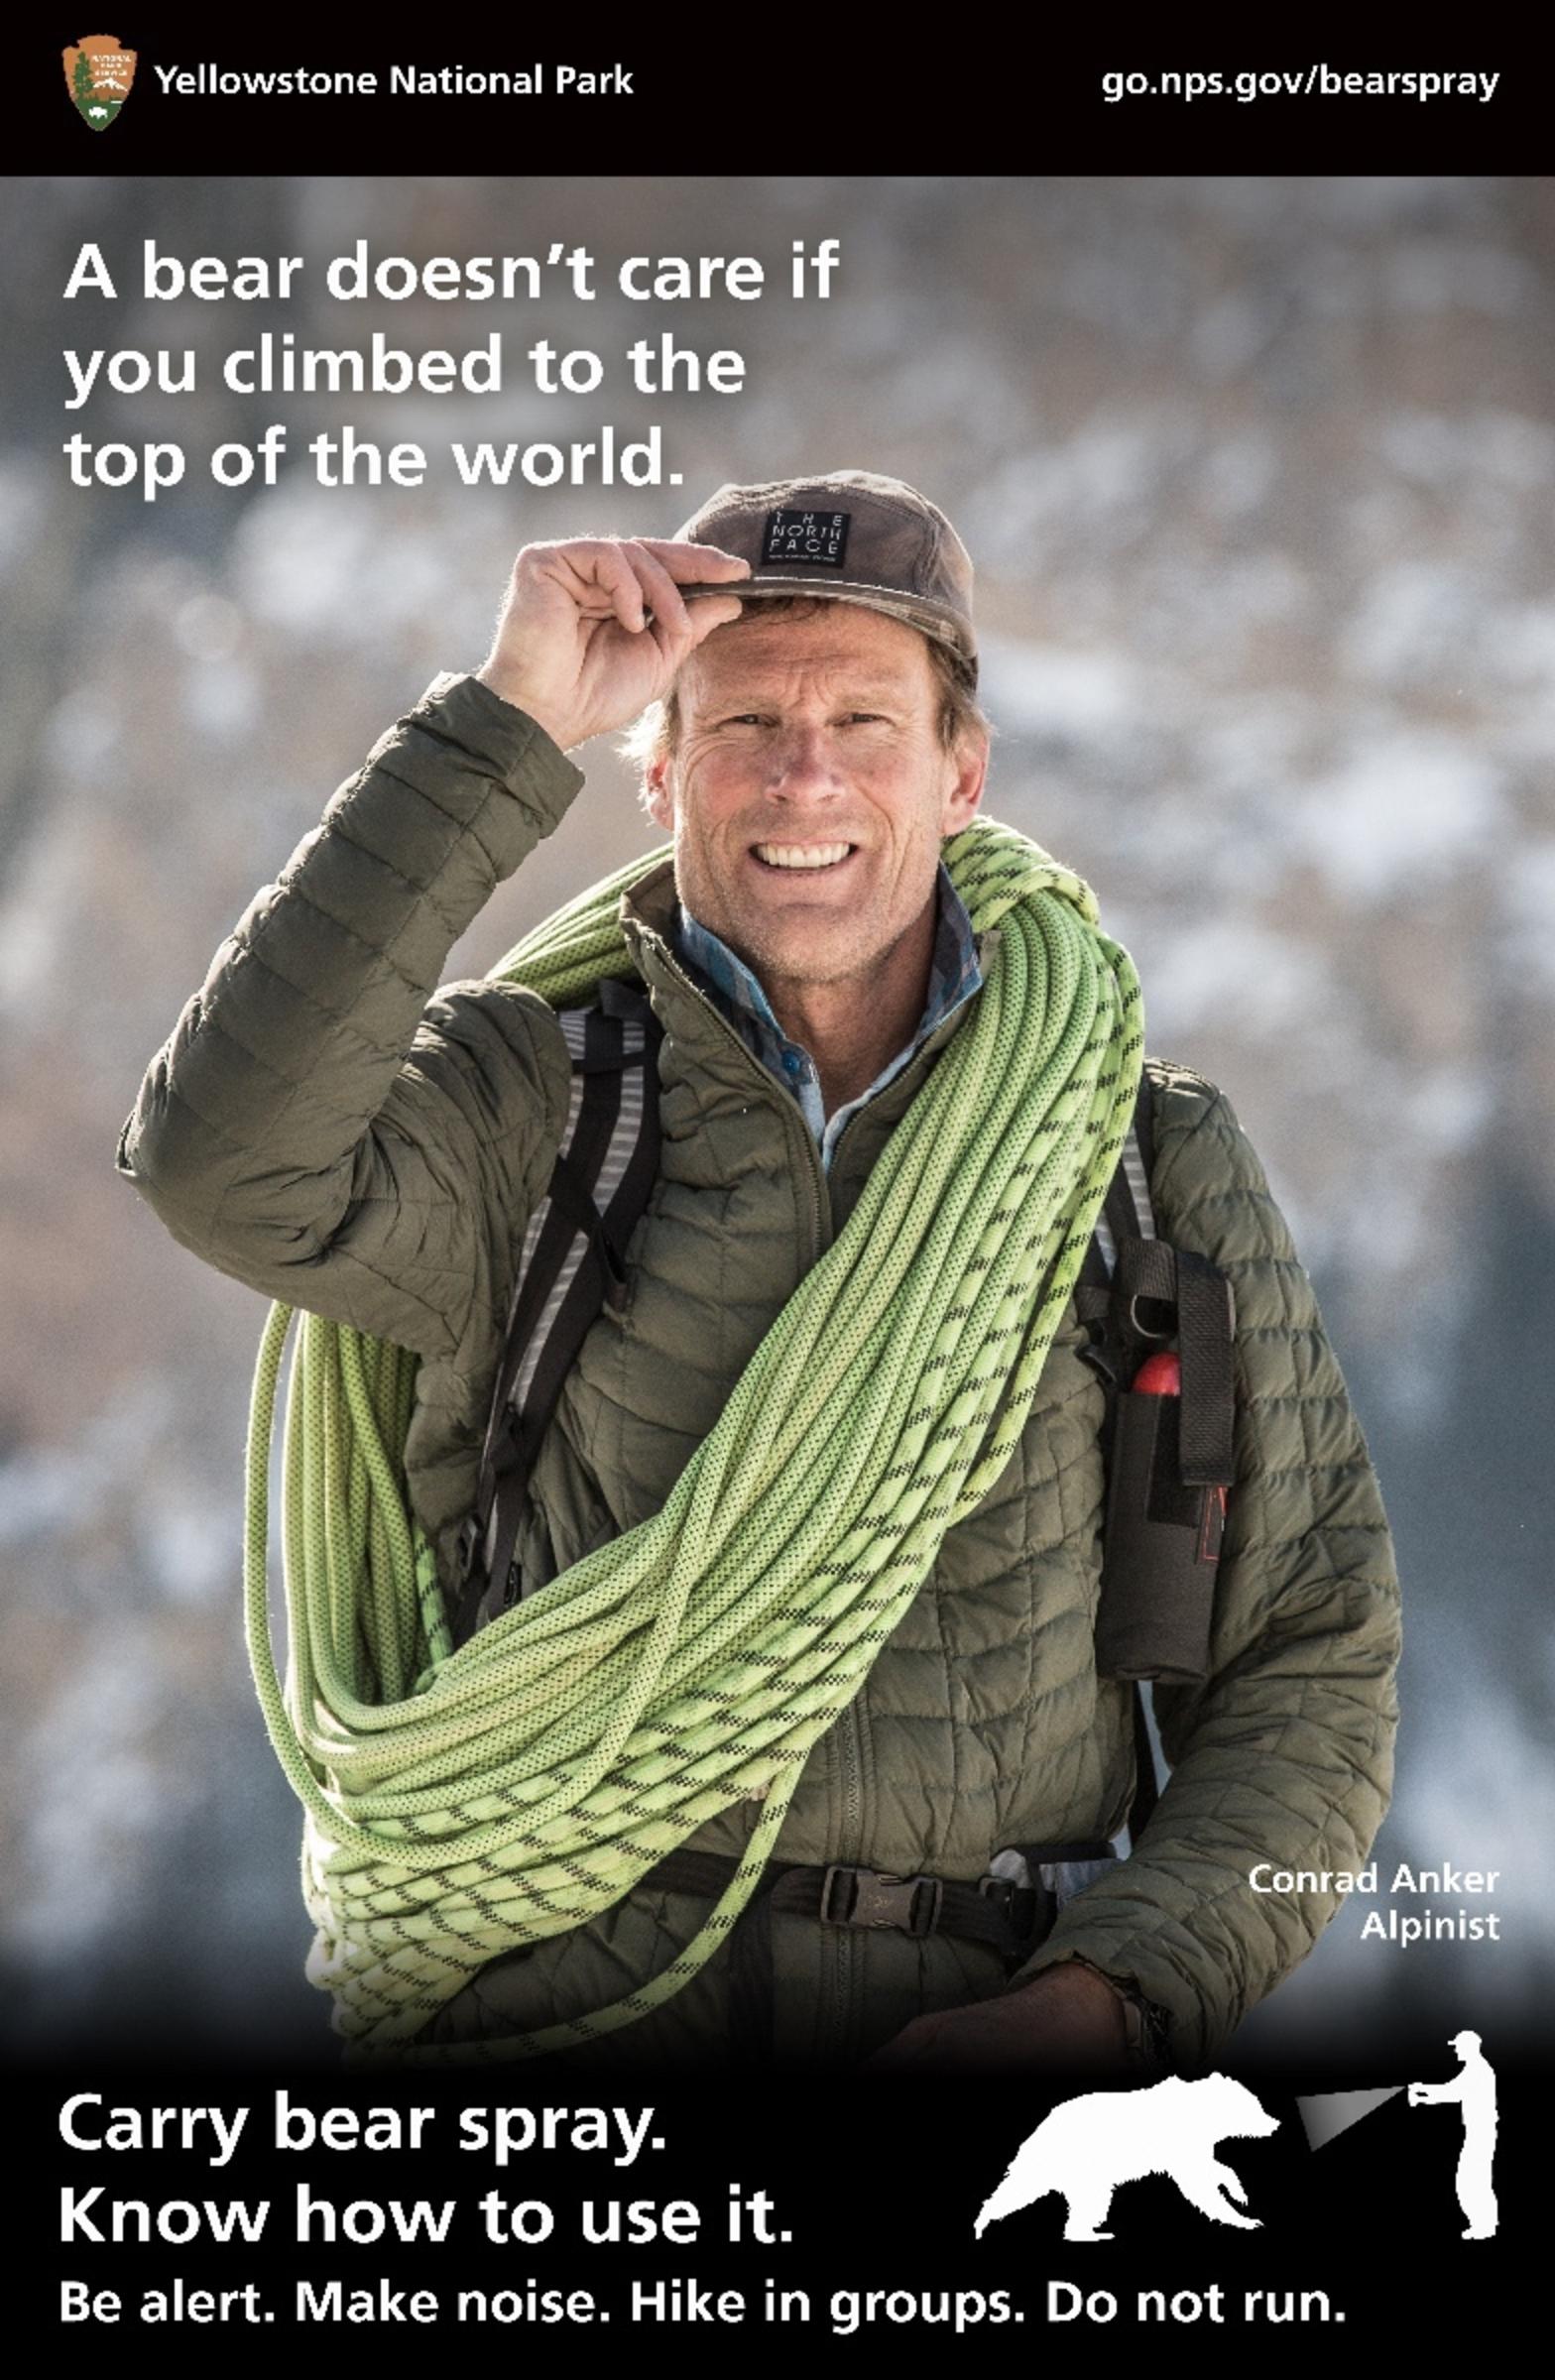 Bozeman mountaineer Conrad Anker, known for summiting Everest and other peaks around the world (including being featured in the film Meru with Jimmy Chin and  Renan Ozturk) is one of the famous faces in 